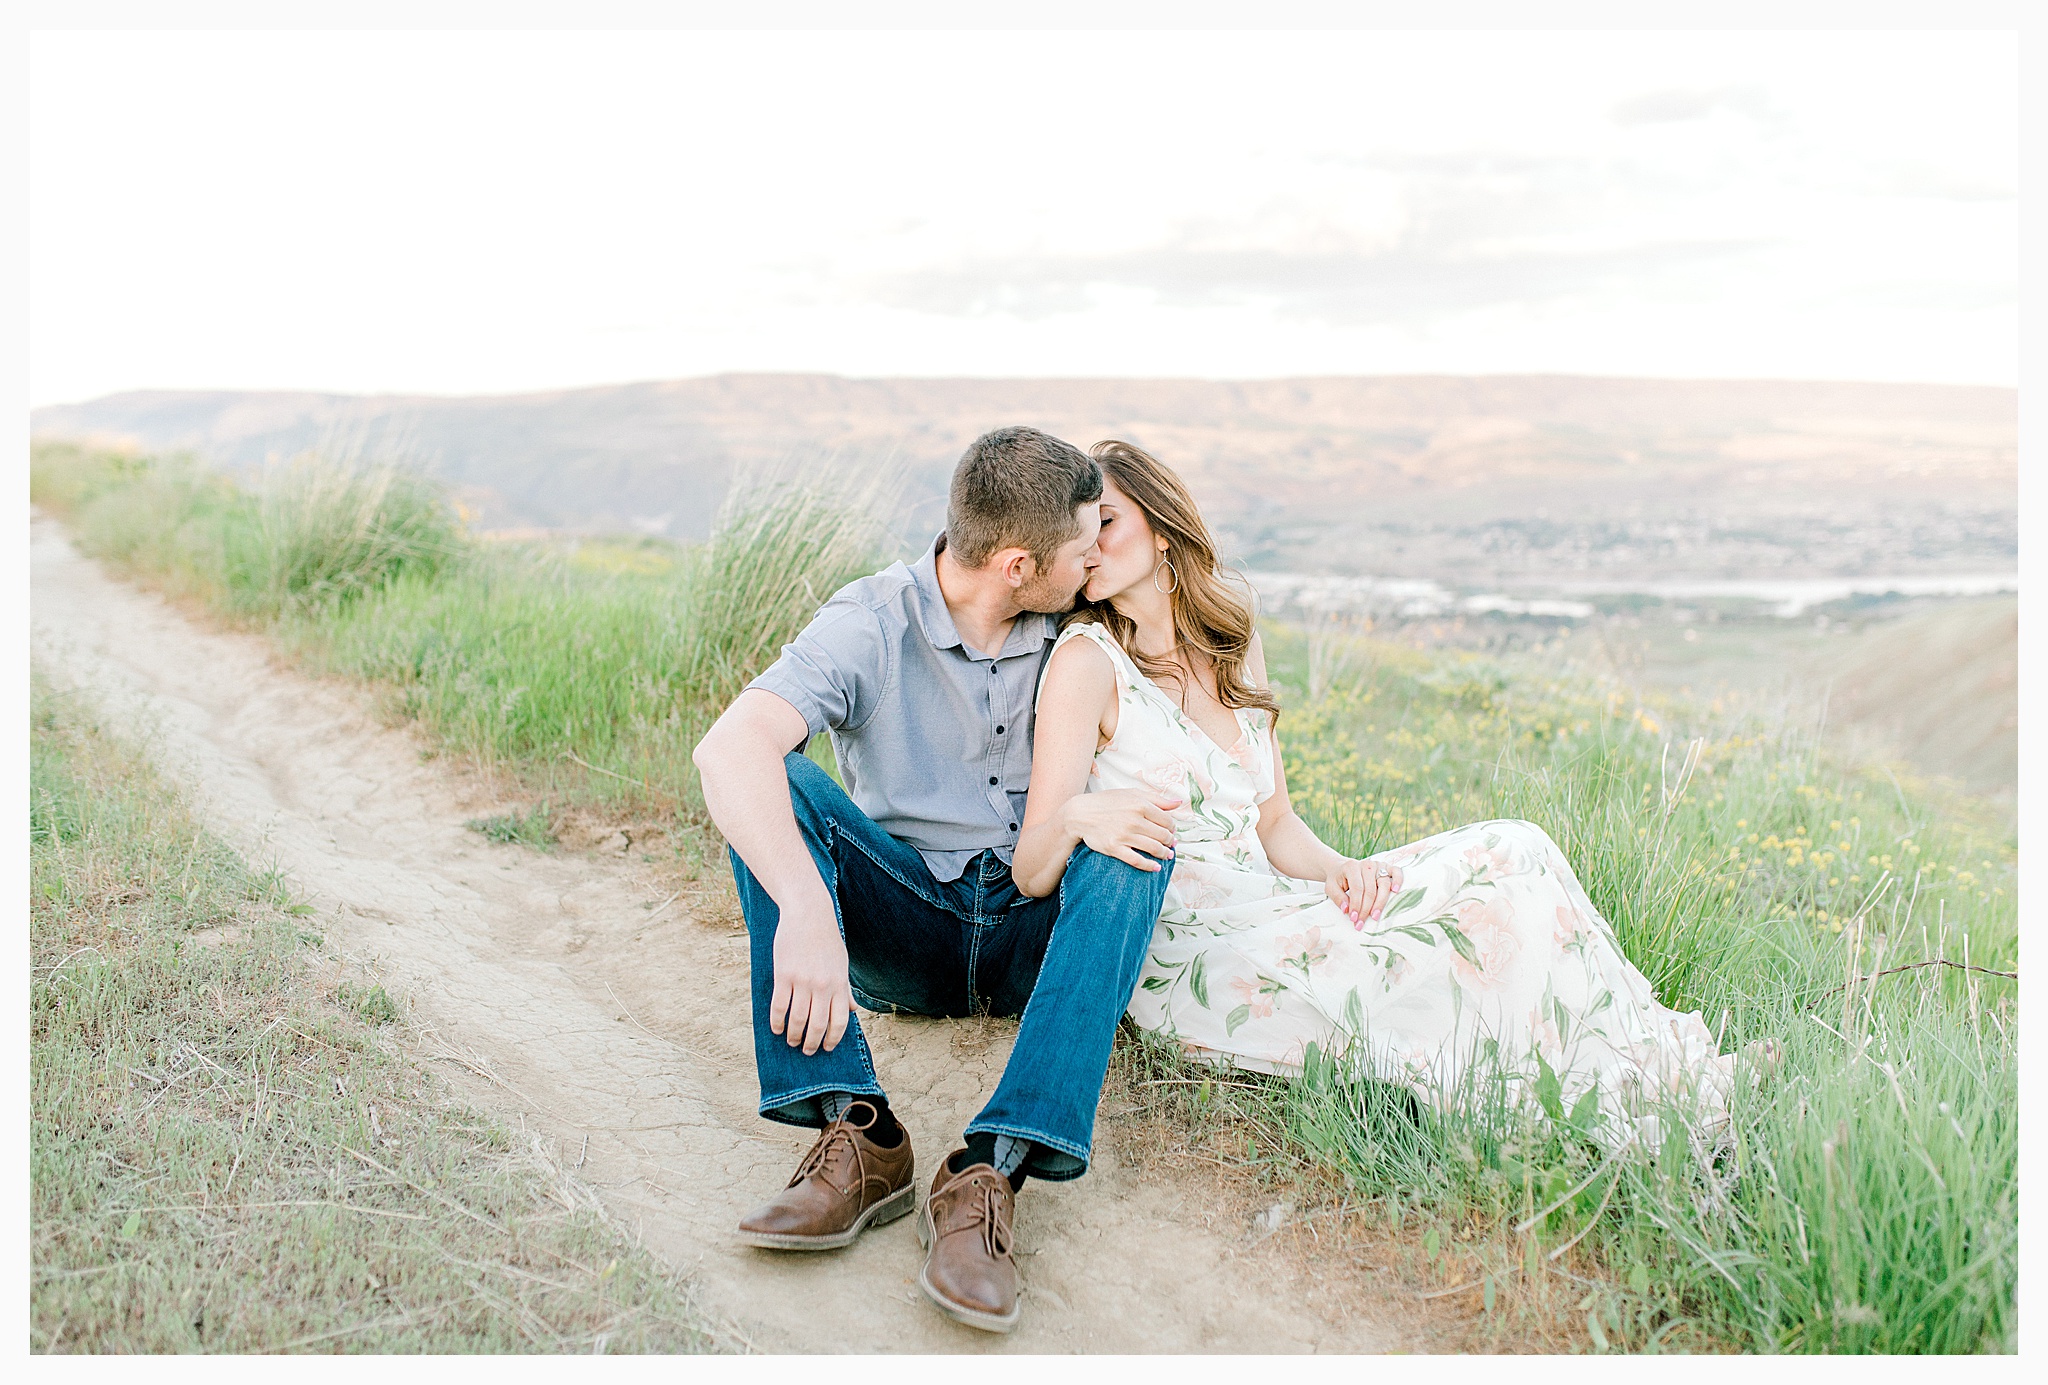 Engagement session amongst the wildflowers in Wenatchee, Washington | Engagement Session Outfit Inspiration for Wedding Photography with Emma Rose Company | Light and Airy PNW Photographer, Seattle Bride_0031.jpg